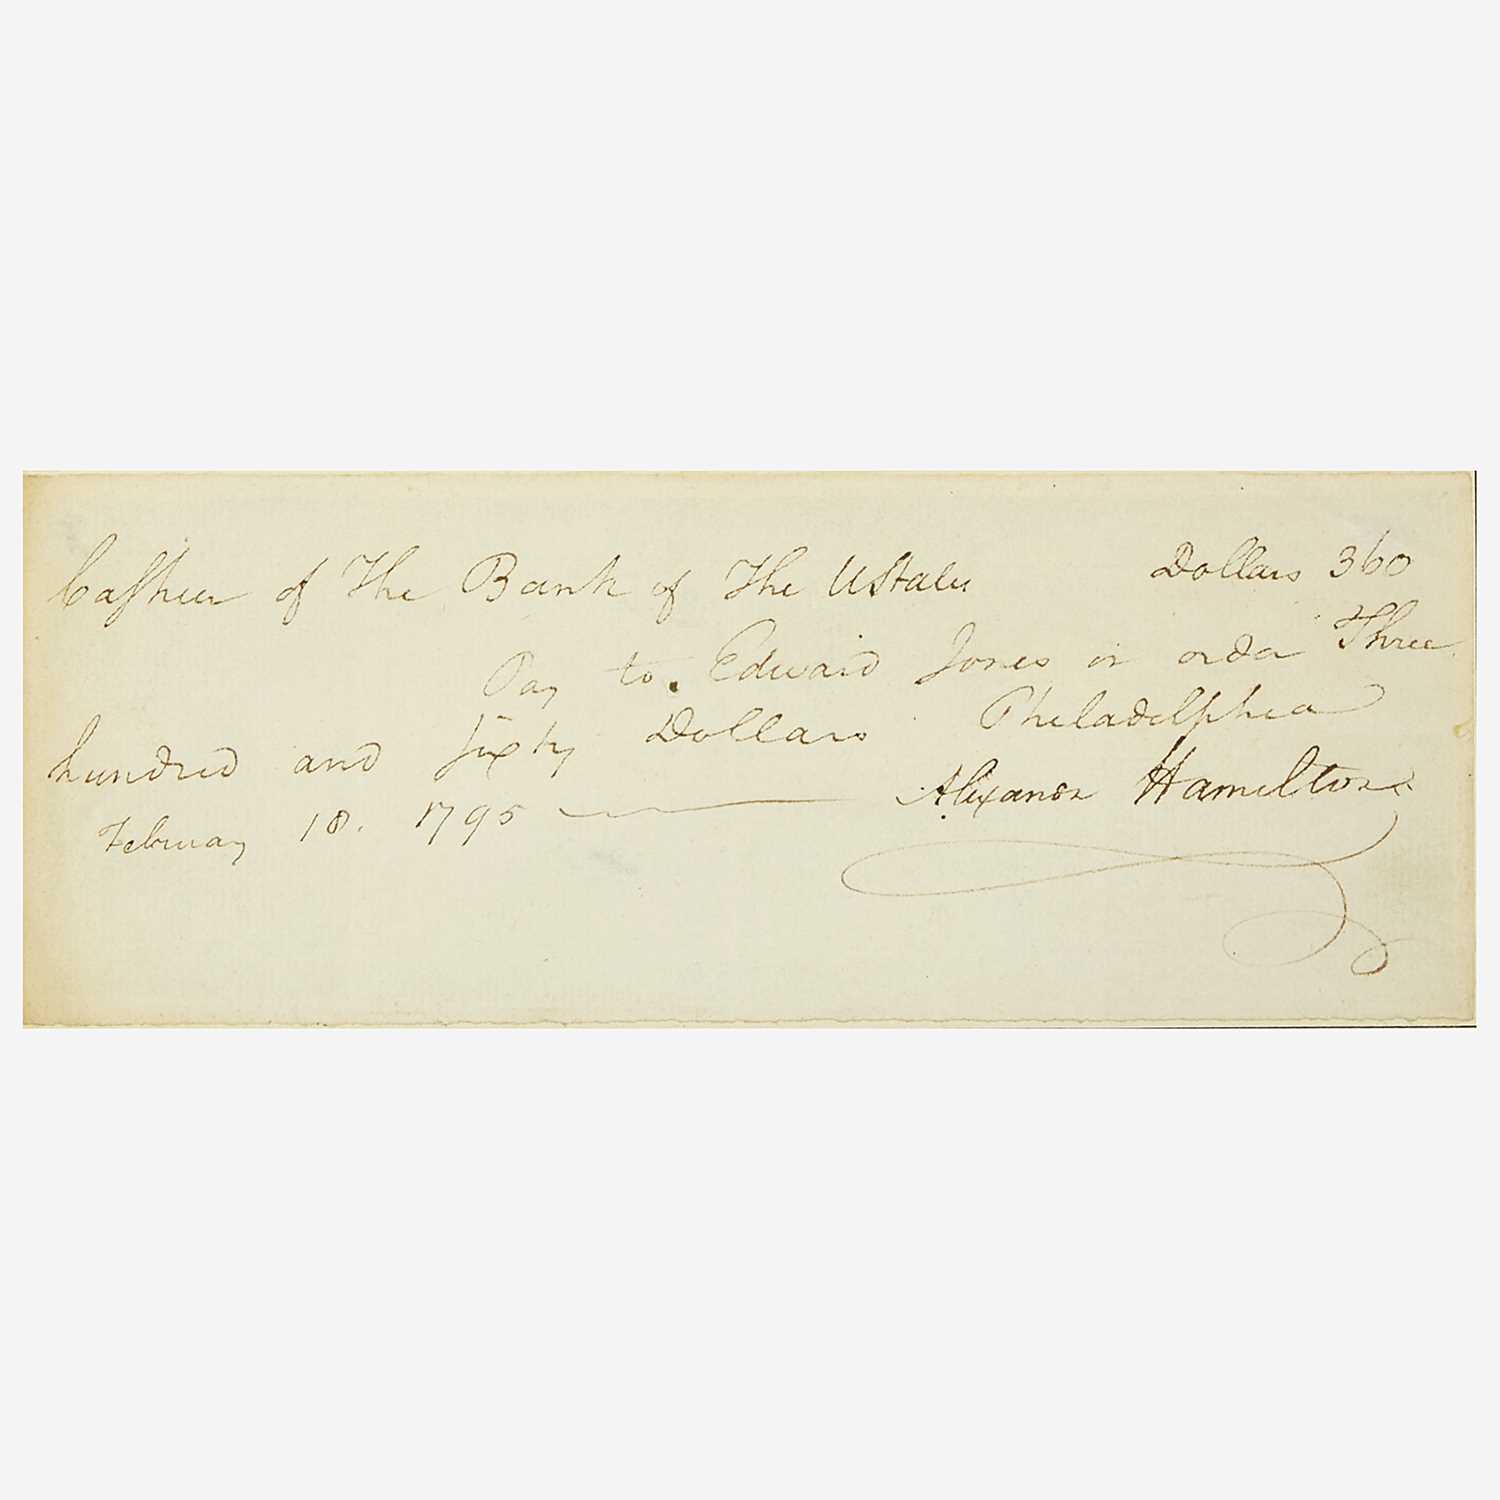 Lot 40 - [Hamilton, Alexander] [First Bank of the United States]